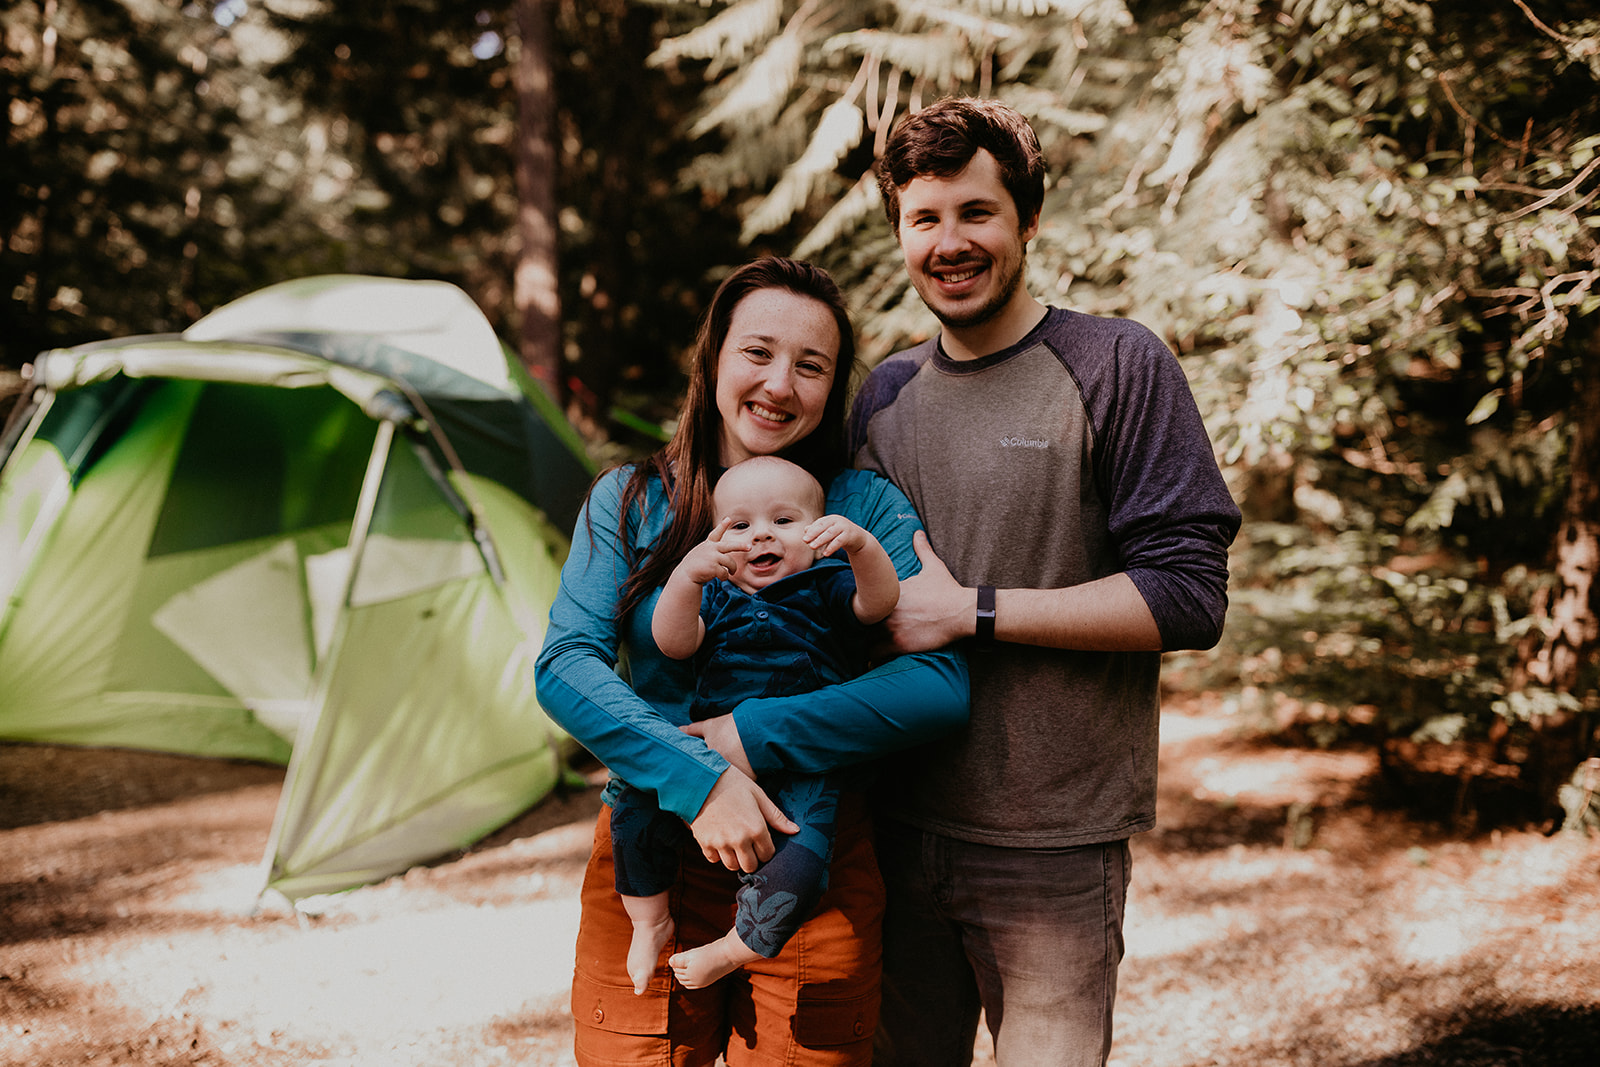 kachess-lake-camping-family-portraits-megan-gallagher-photography_(80_of_335).jpg